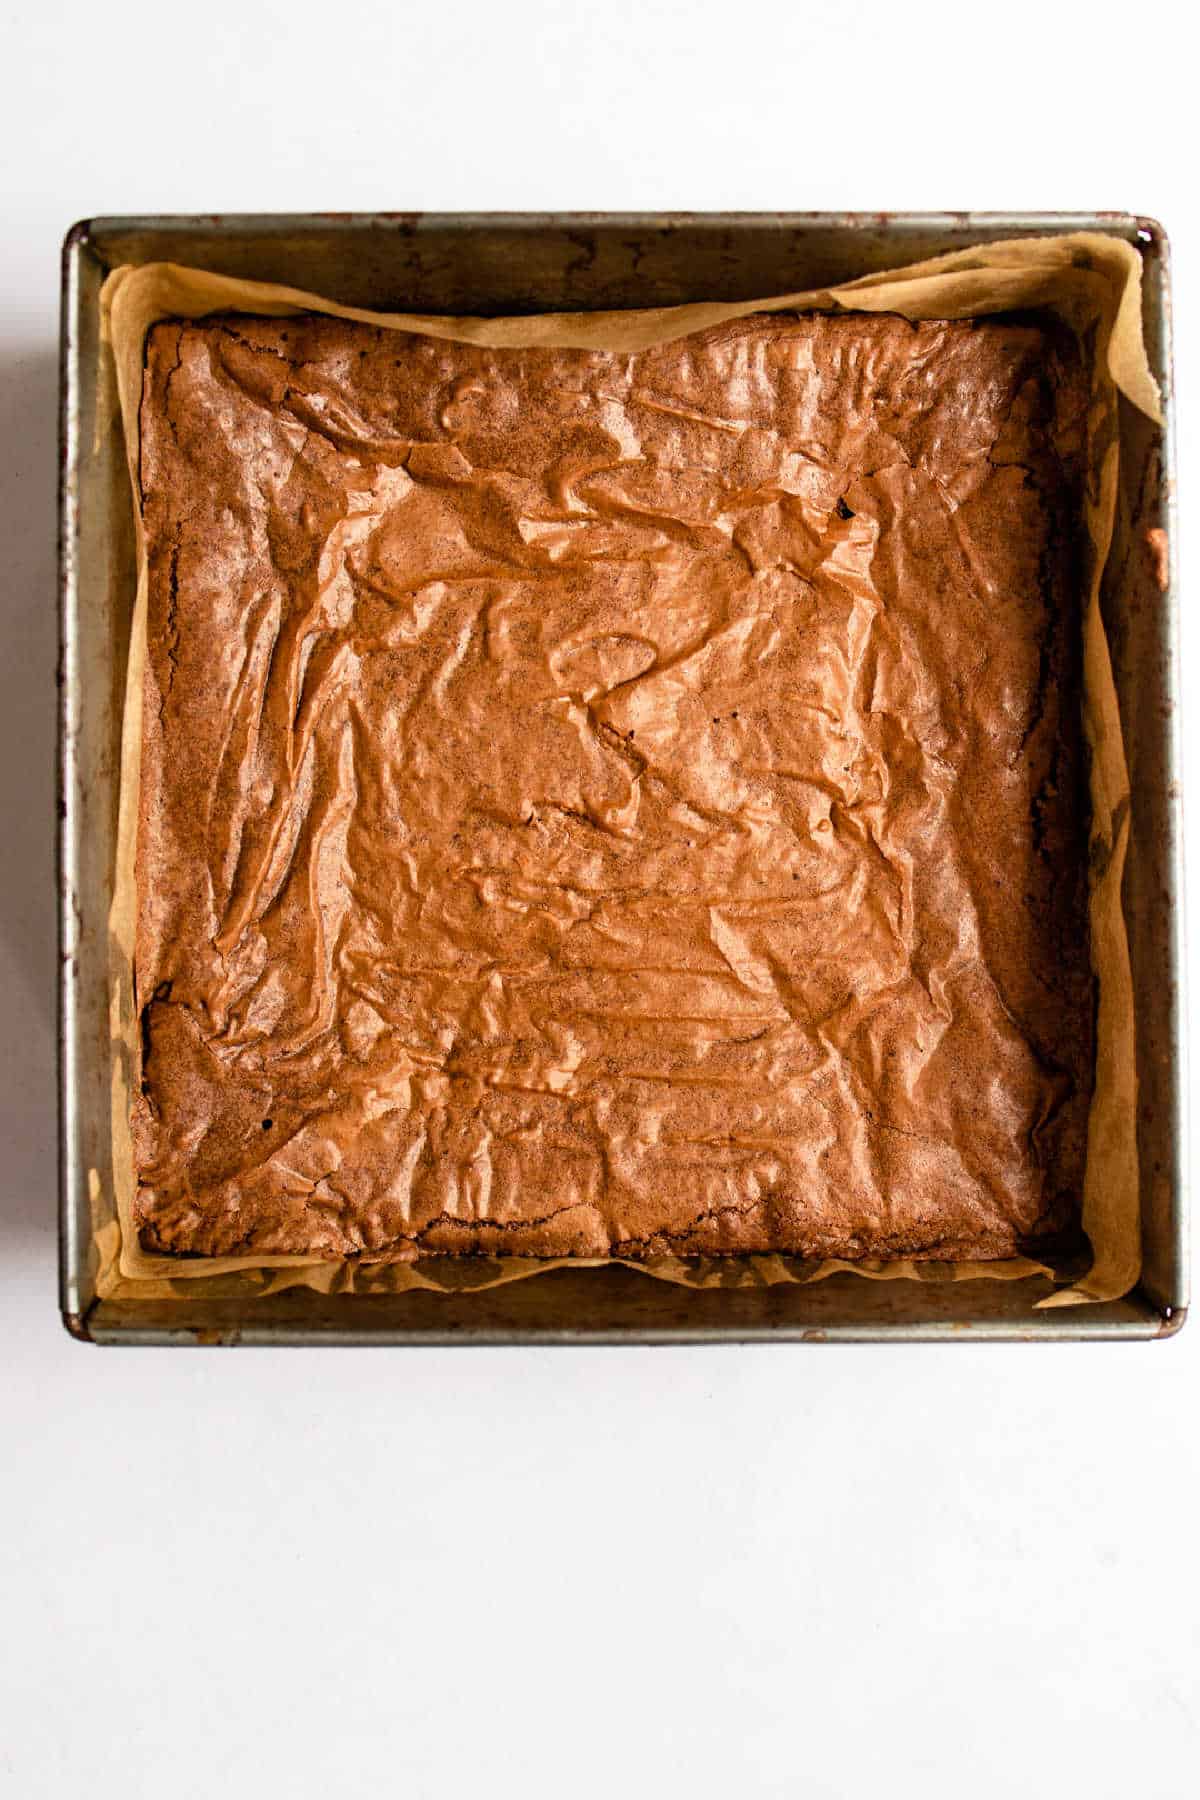 Baked brownie in a 9 by 9 pan.